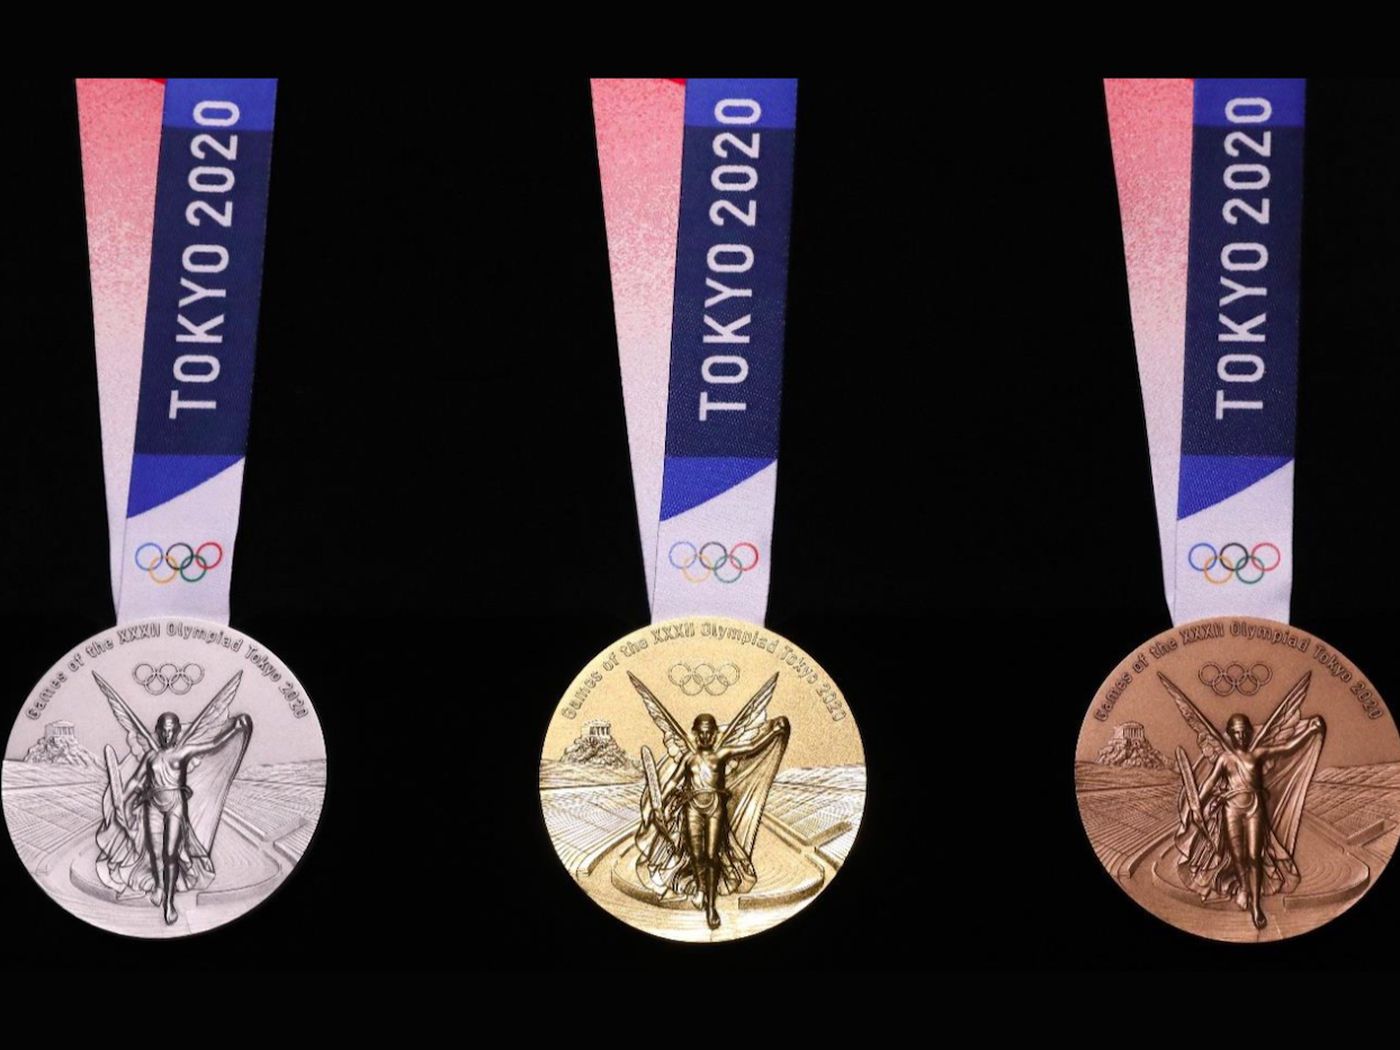 How much gold is there in a olympic gold medal Tokyo Unveils 2020 Olympic Medals Harvested From Old Gadgets The Verge